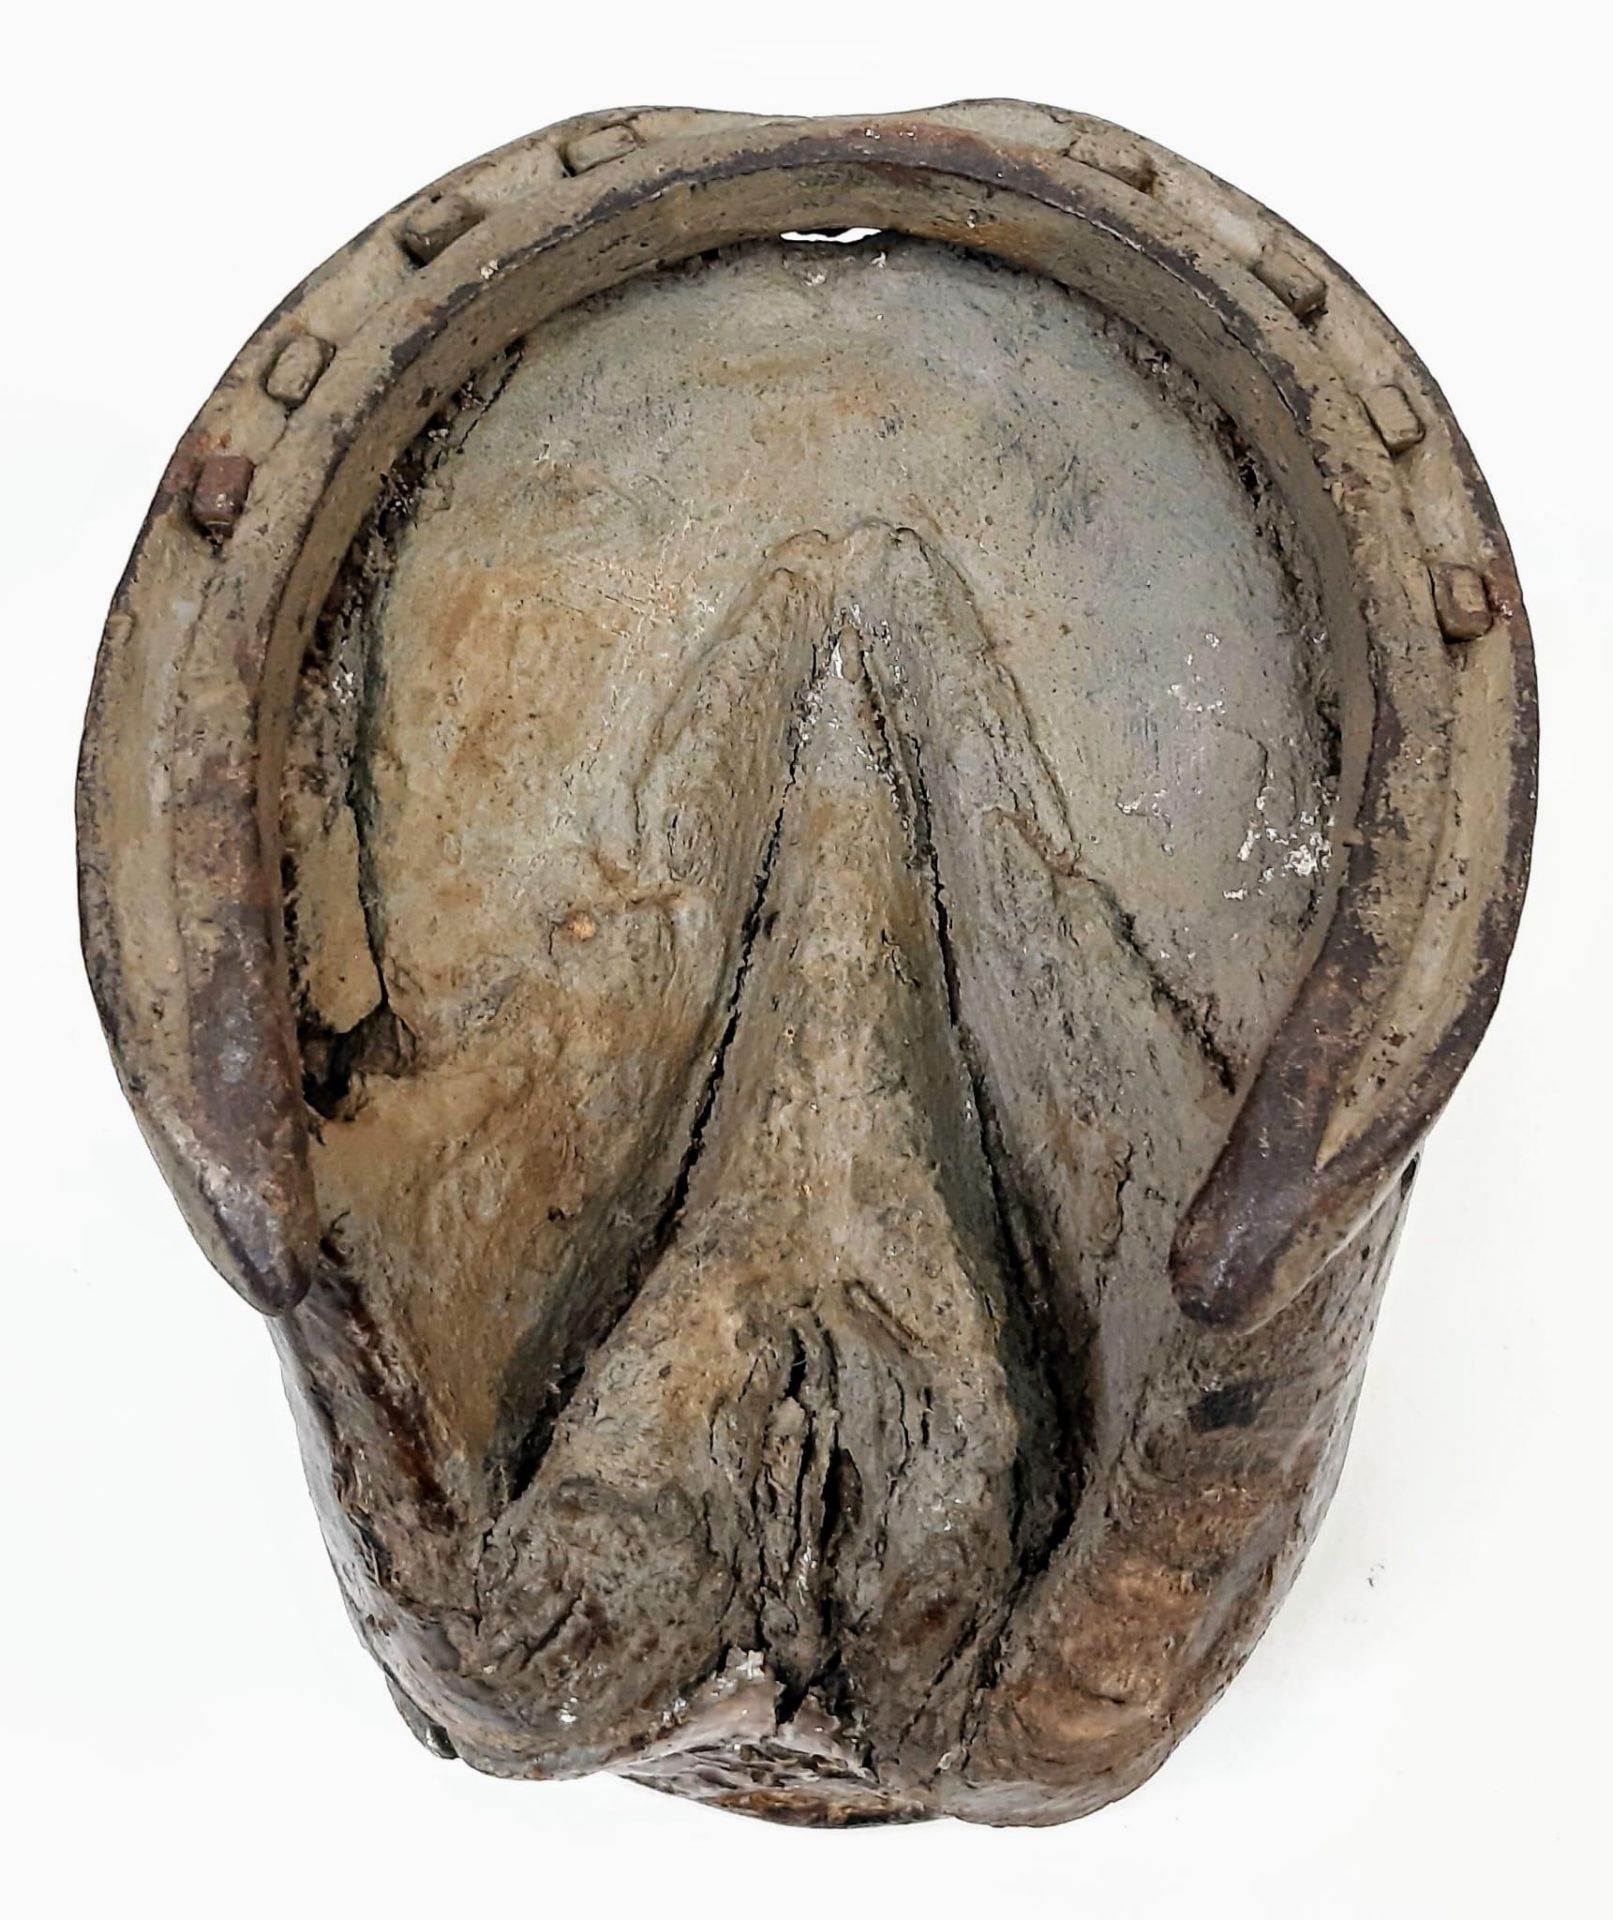 WW1 Trench Art Horse Hoof from a Horse in the Royal Horse Artillery during the First World War. - Image 5 of 6